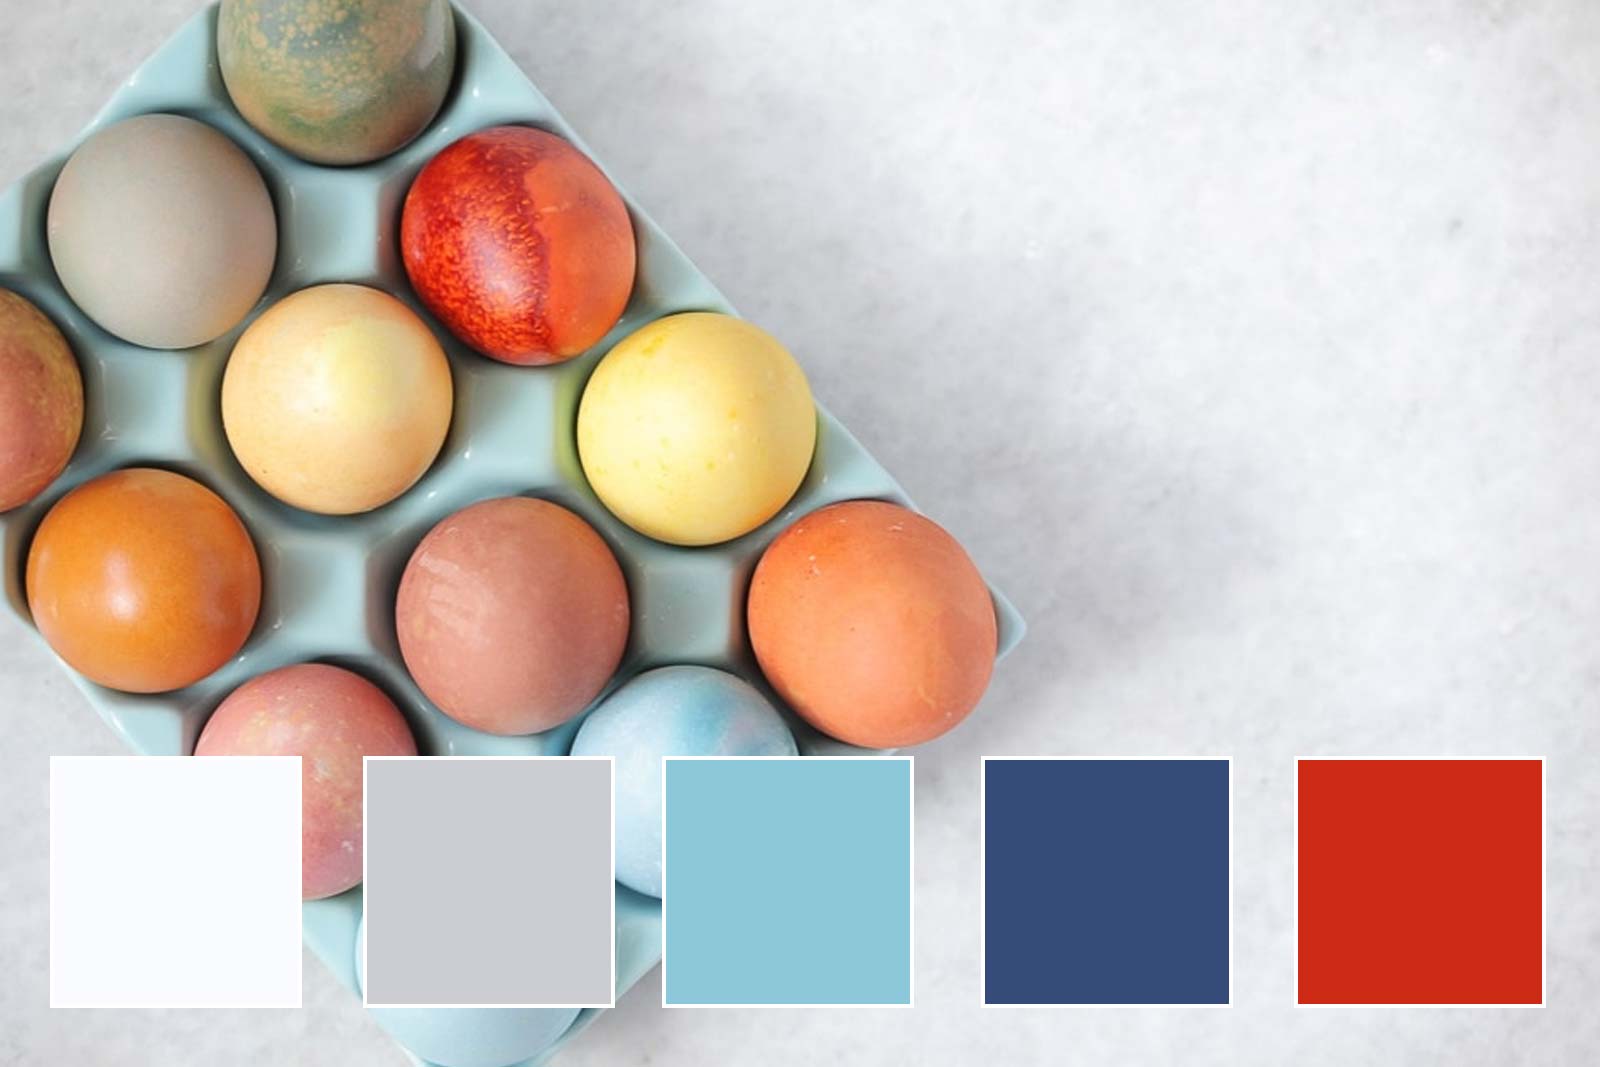 You got: Classic Renewal! What Is Your Spring Color Palette?